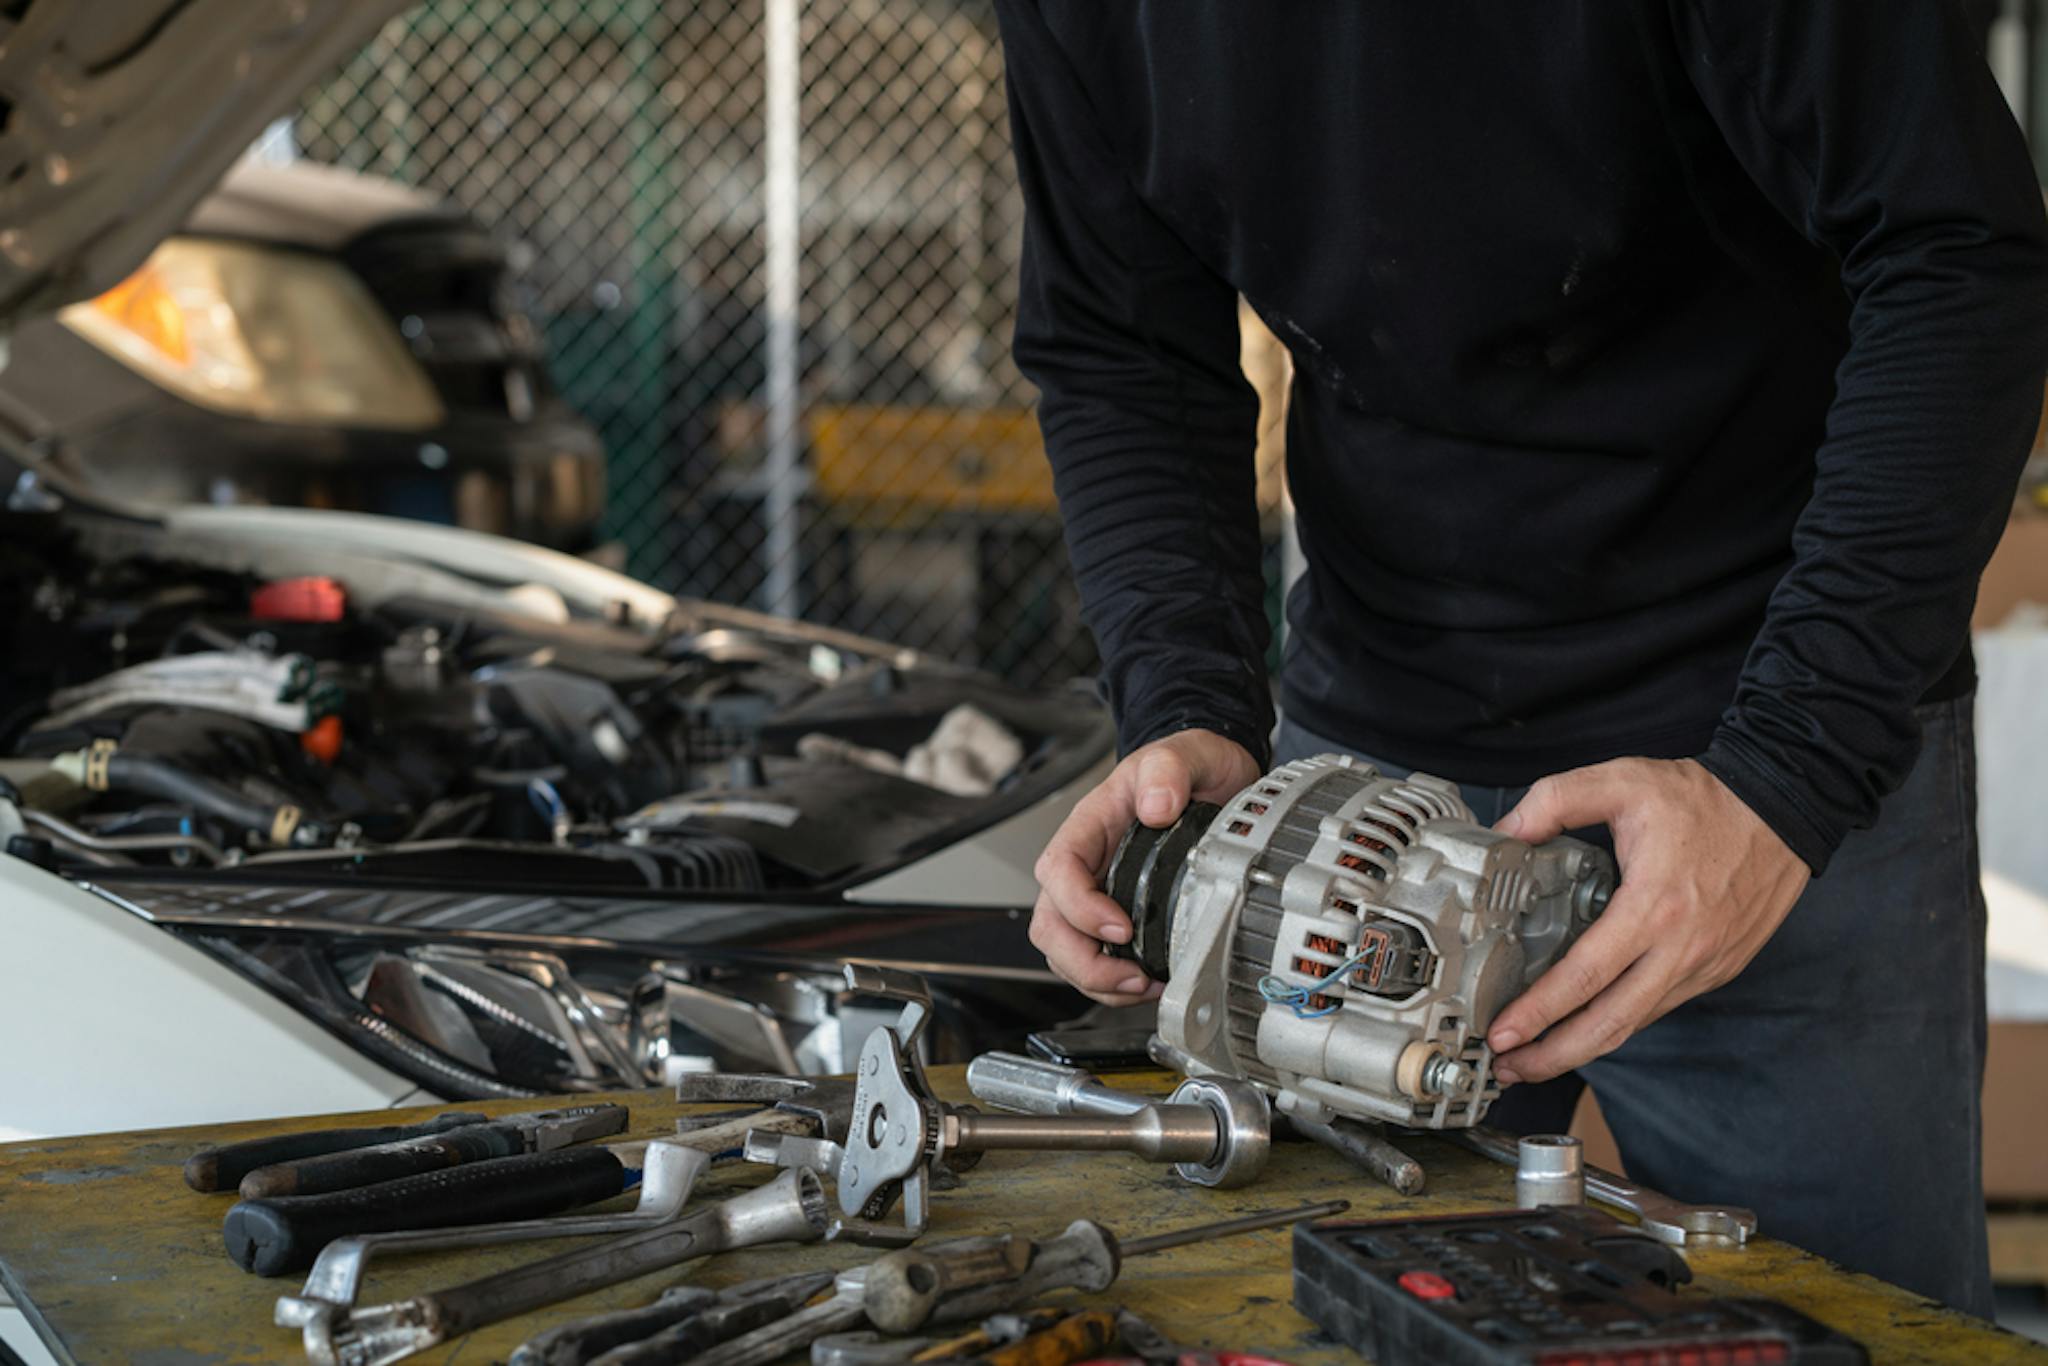 A man holding an alternator getting ready to fit it to a car